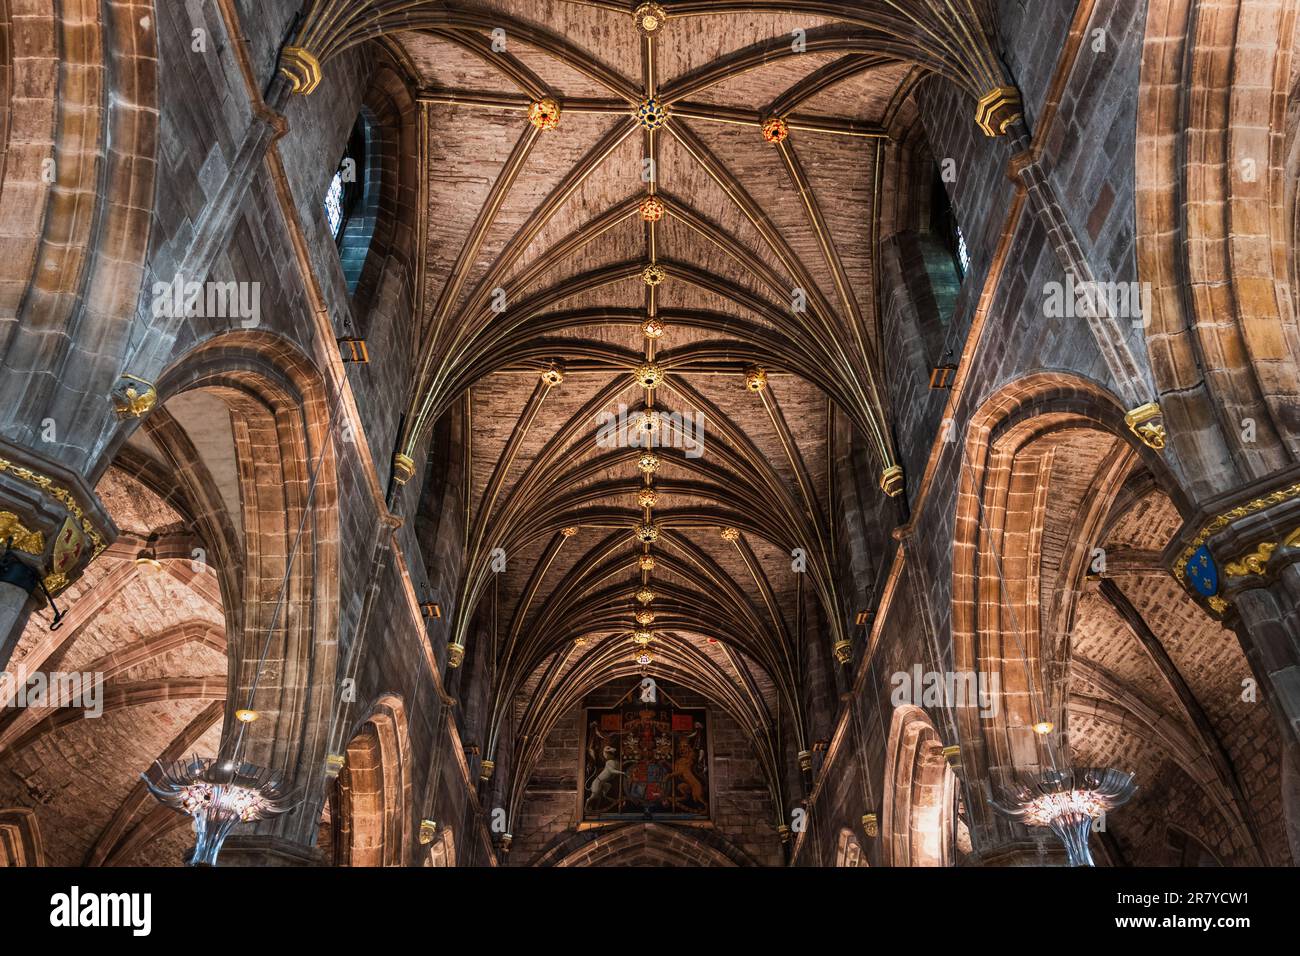 Rib vault in St. Giles Cathedral interior in Edinburgh, Scotland, UK. Vaulted ceiling in parish church also known as the the High Kirk, located in the Stock Photo